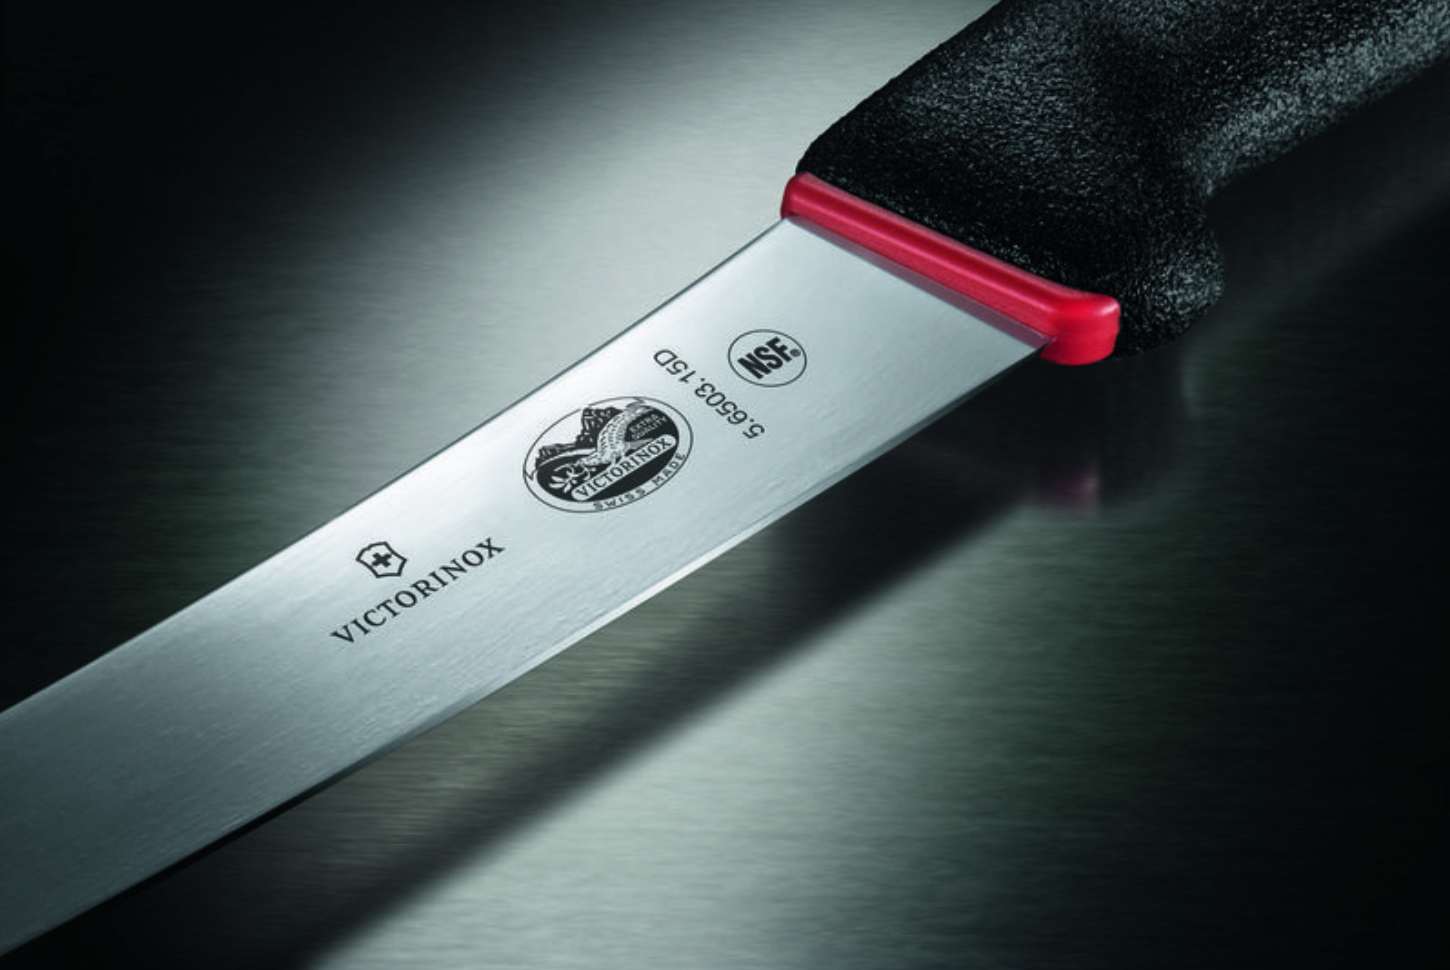 https://www.hospitalitydirectory.com.au/images/product_images/Victorinox/Product_News/2024/2024May01_Dual-Grip/Victorinox_Dual-Grip3.jpg